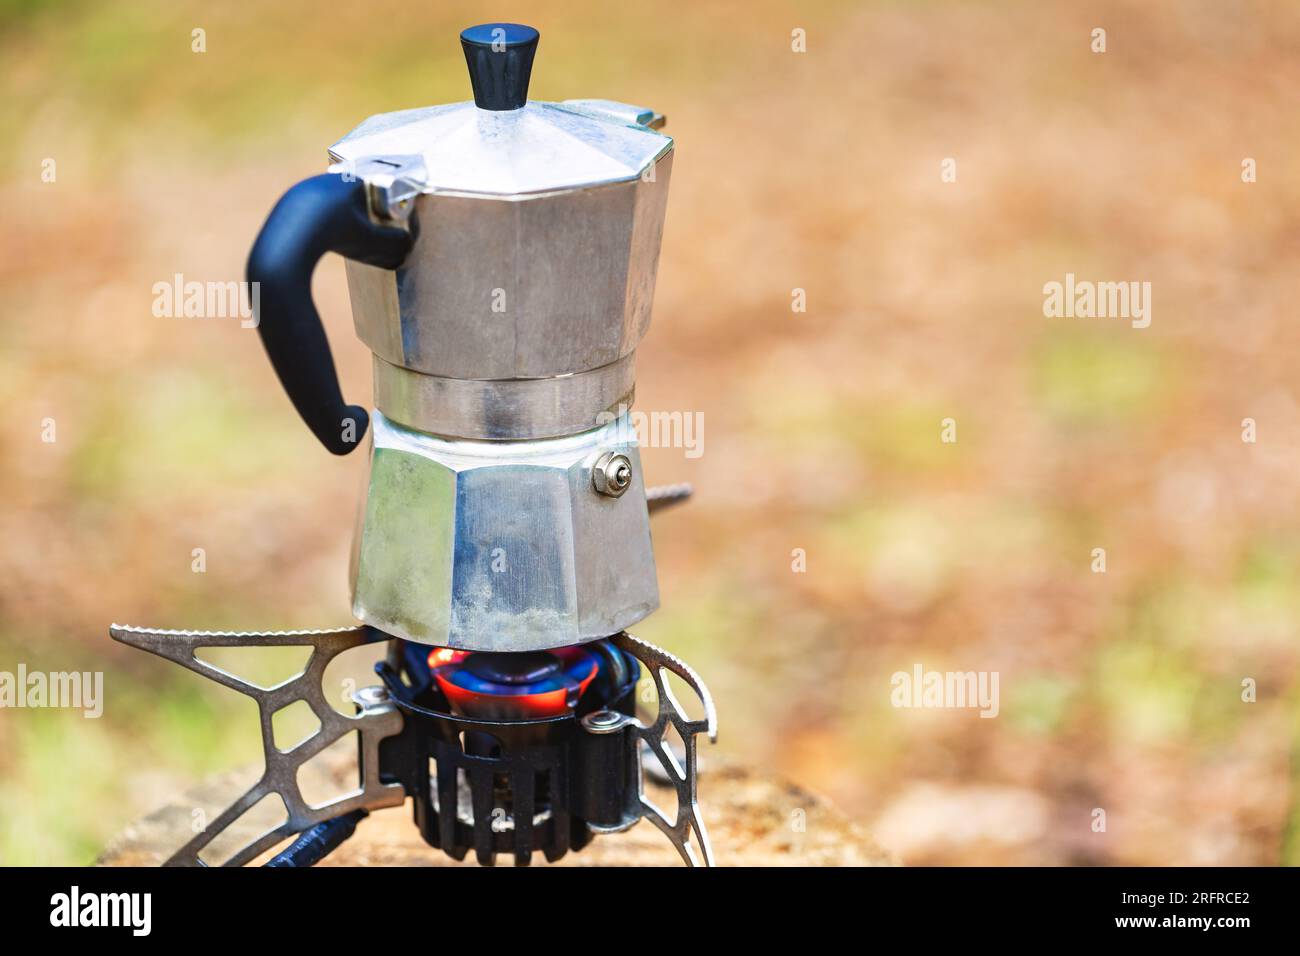 https://c8.alamy.com/comp/2RFRCE2/brewing-italian-style-coffee-in-aluminum-moka-pot-on-a-portable-stove-during-wild-camping-in-a-forest-2RFRCE2.jpg